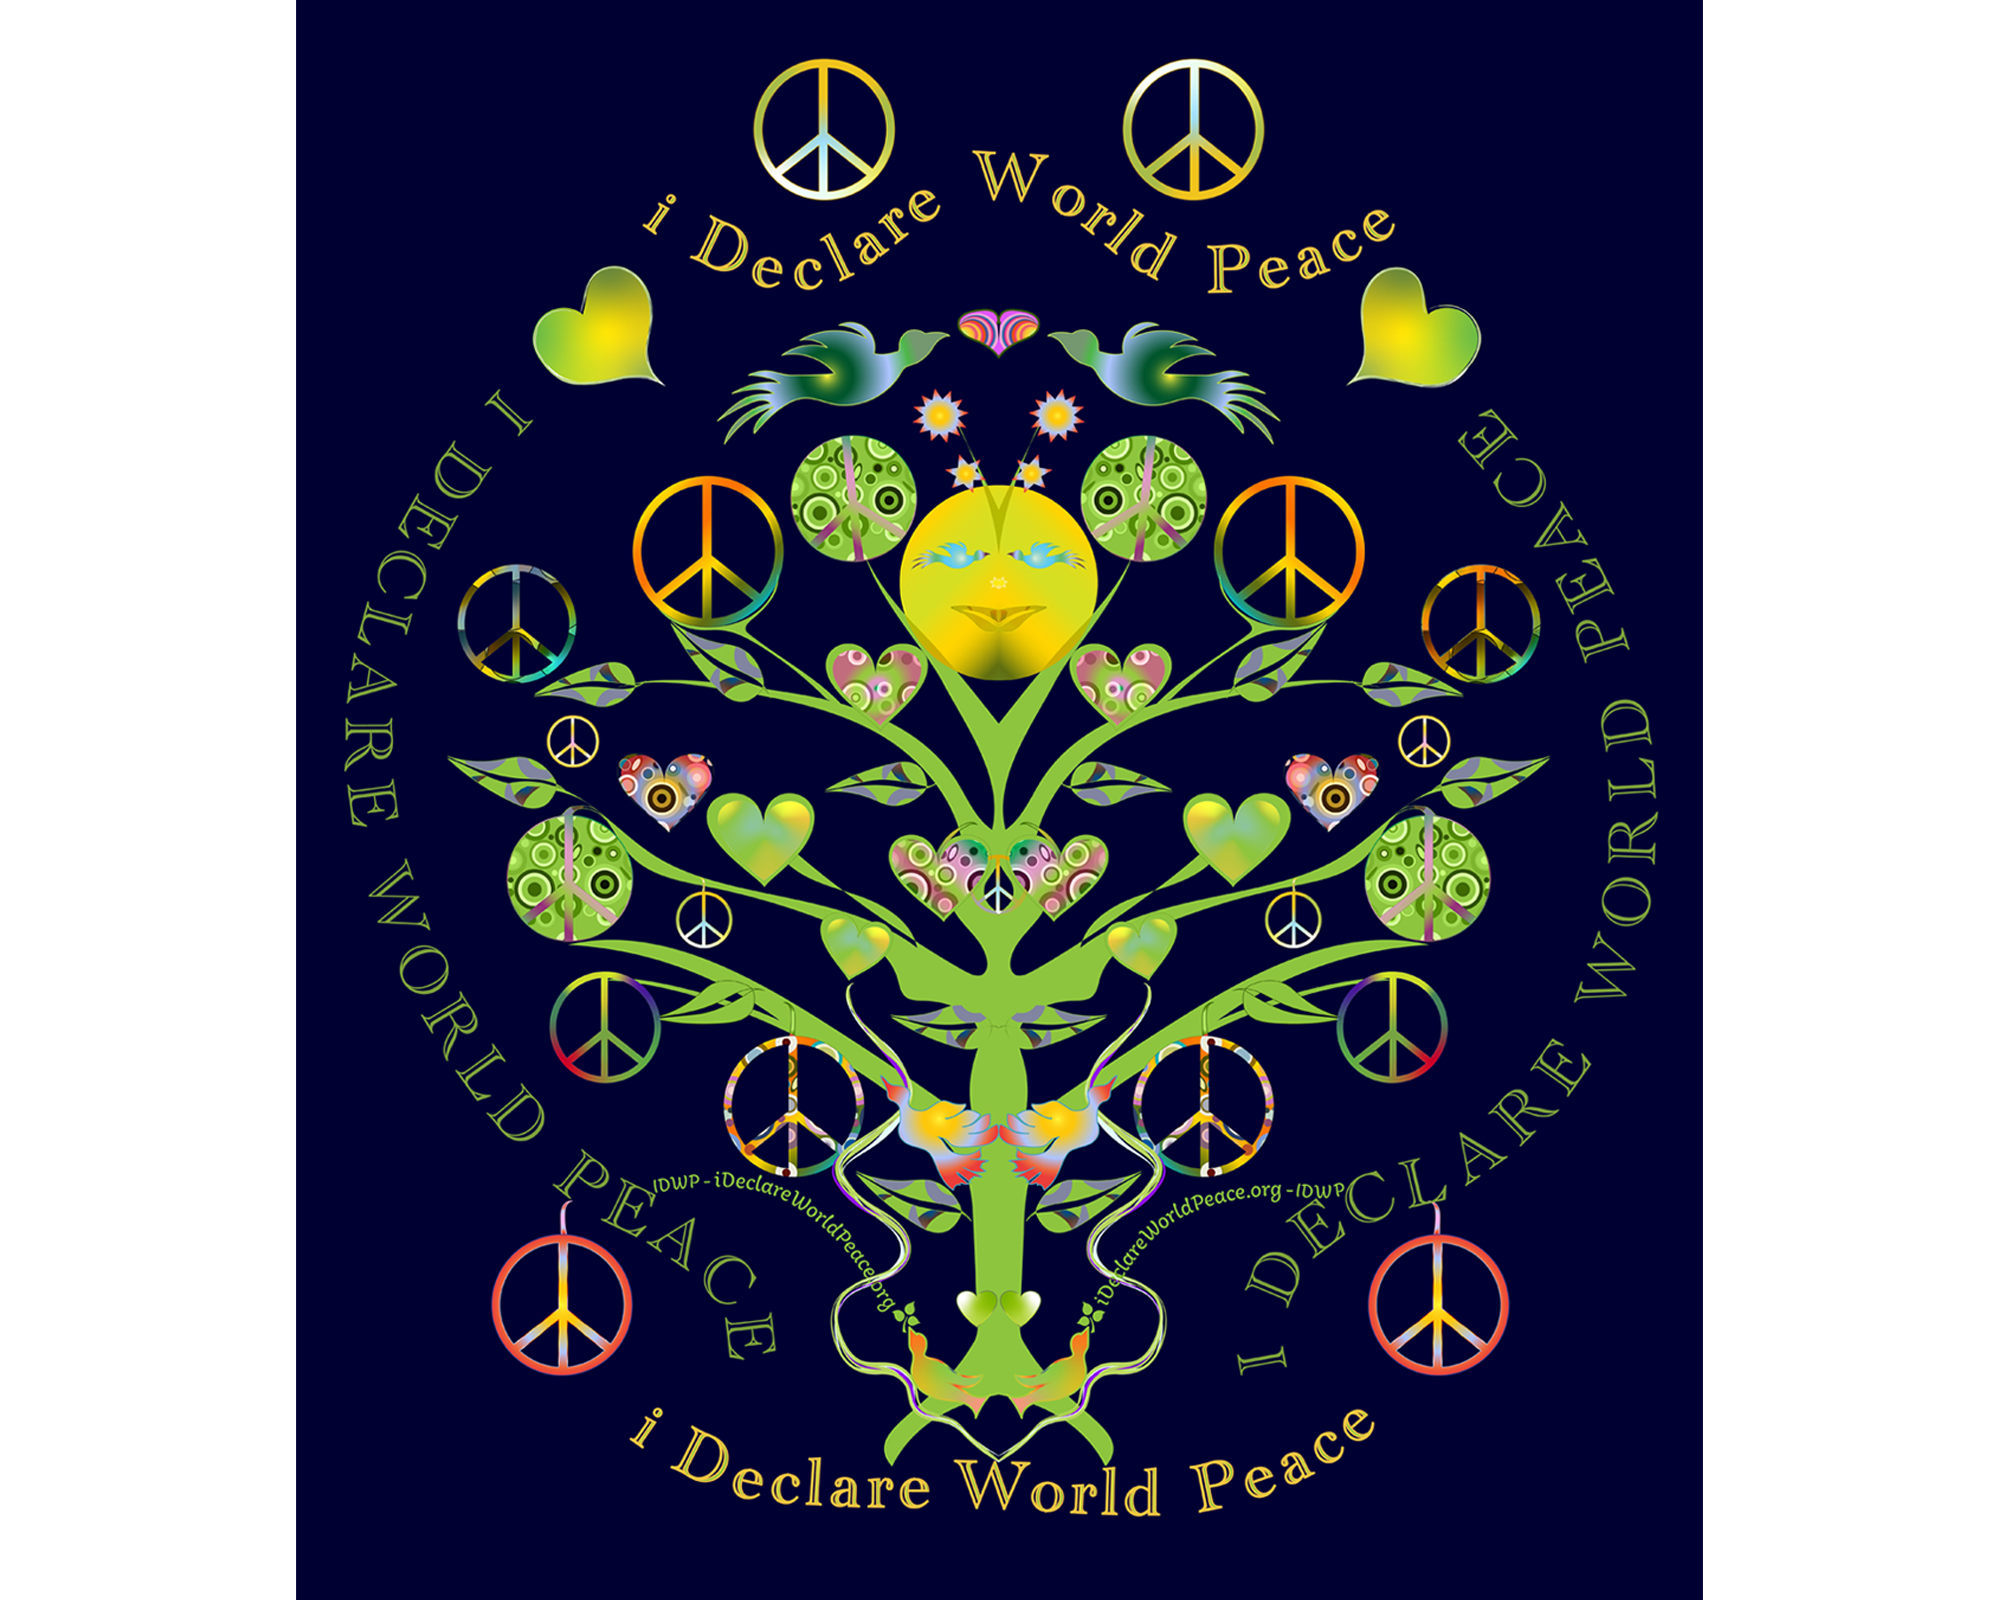 #IDWP The I Declare World Peace Tree reflecting love and harmony. Click for store.